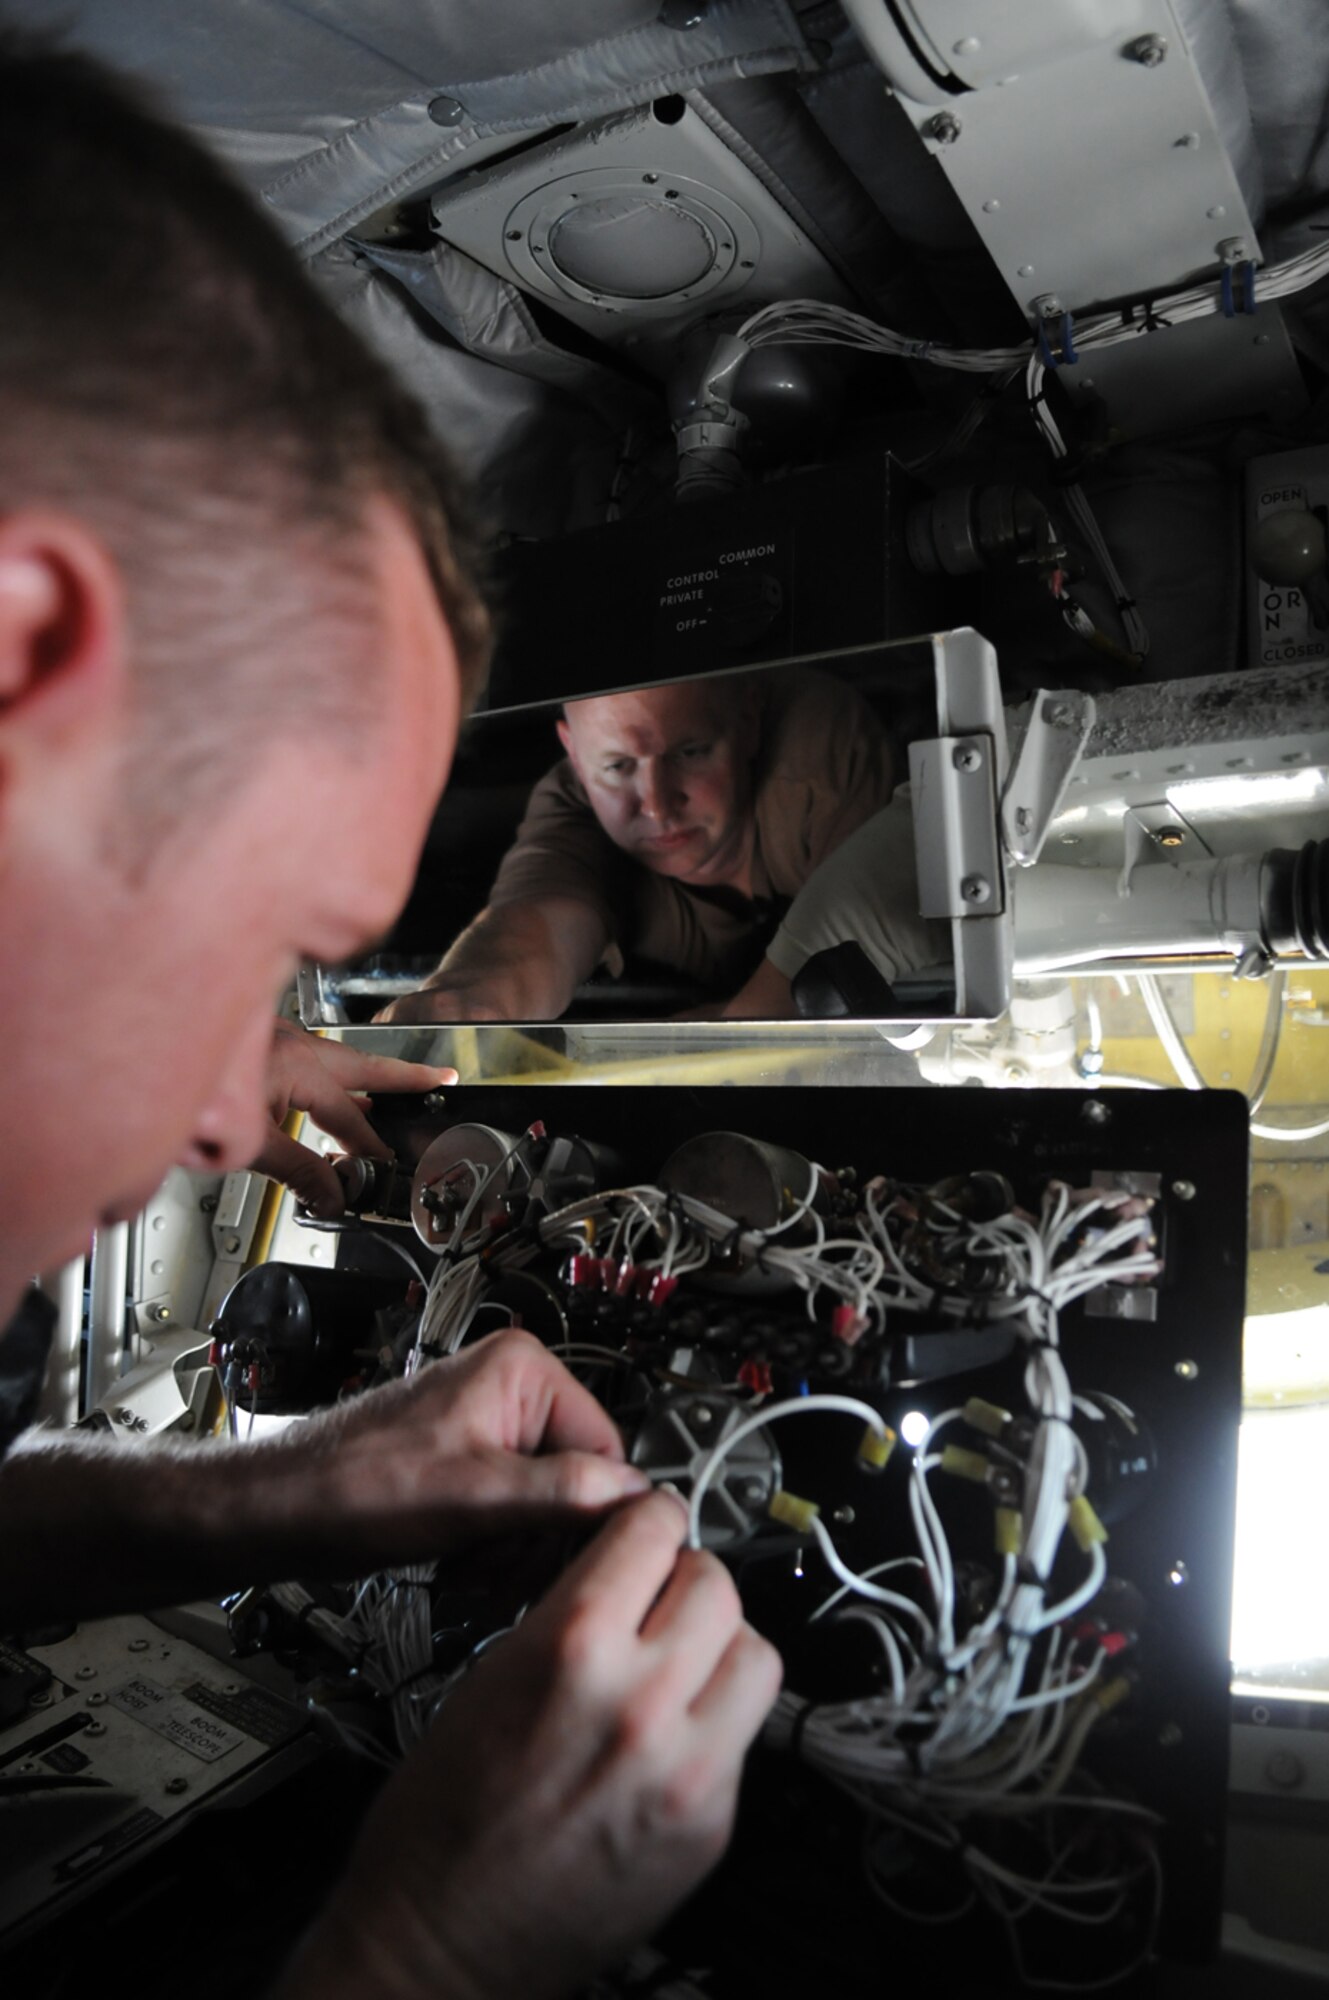 MANAS AIR BASE, Kyrgyz Republic -- Tech. Sgt. Jeremy Metzger, 376th Expeditionary Aircraft Maintenance Squadron, replaces a lighting transformer on a KC-135 during routine maintenance operations. Maintainers, aircrew and support personnel from the 376th Air Expeditionary Wing helped Manas bust through the million pound mark July 17, when the wing's KC-135s offloaded 1.01 million pounds of fuel to an array of aircraft supporting combat operations over Afghanistan. (U.S. Air Force photo / Airman 1st Class Ruth Holcomb)